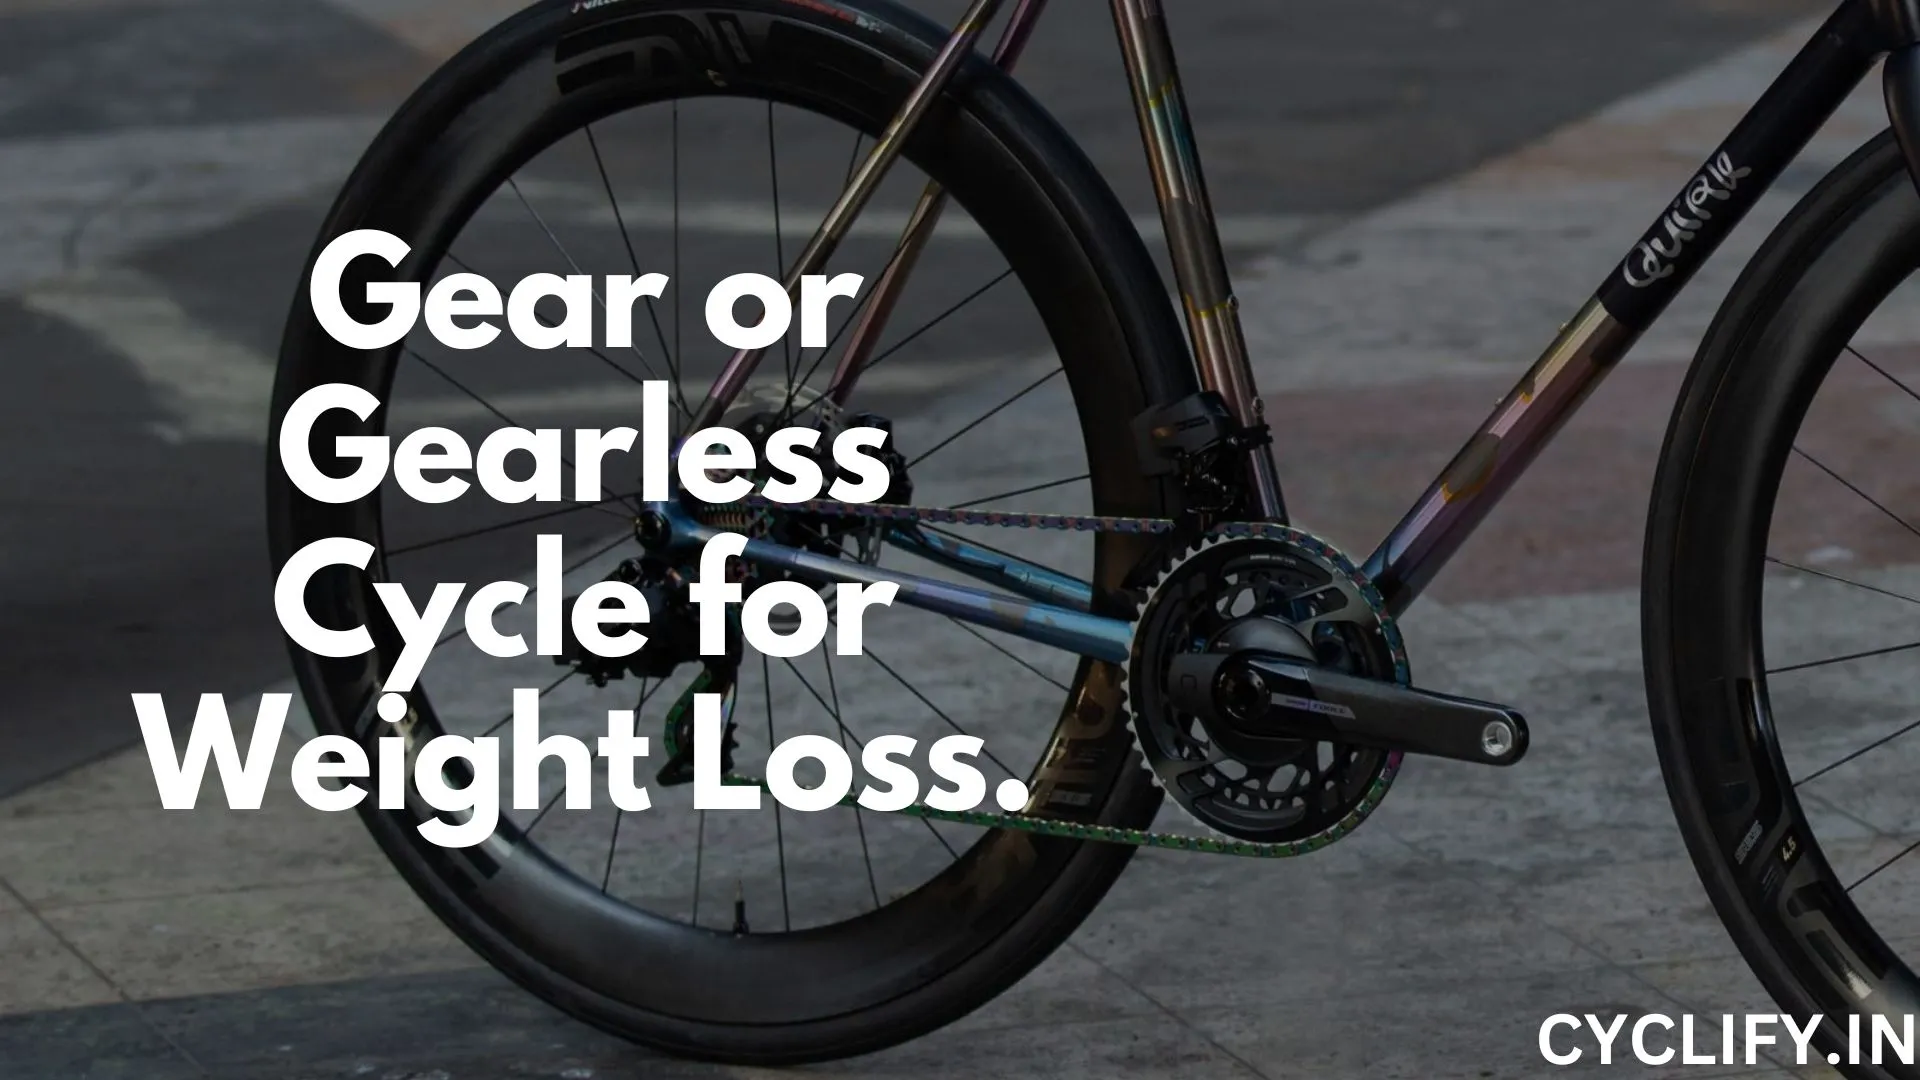 Gear or Gearless Cycle for Weight loss.